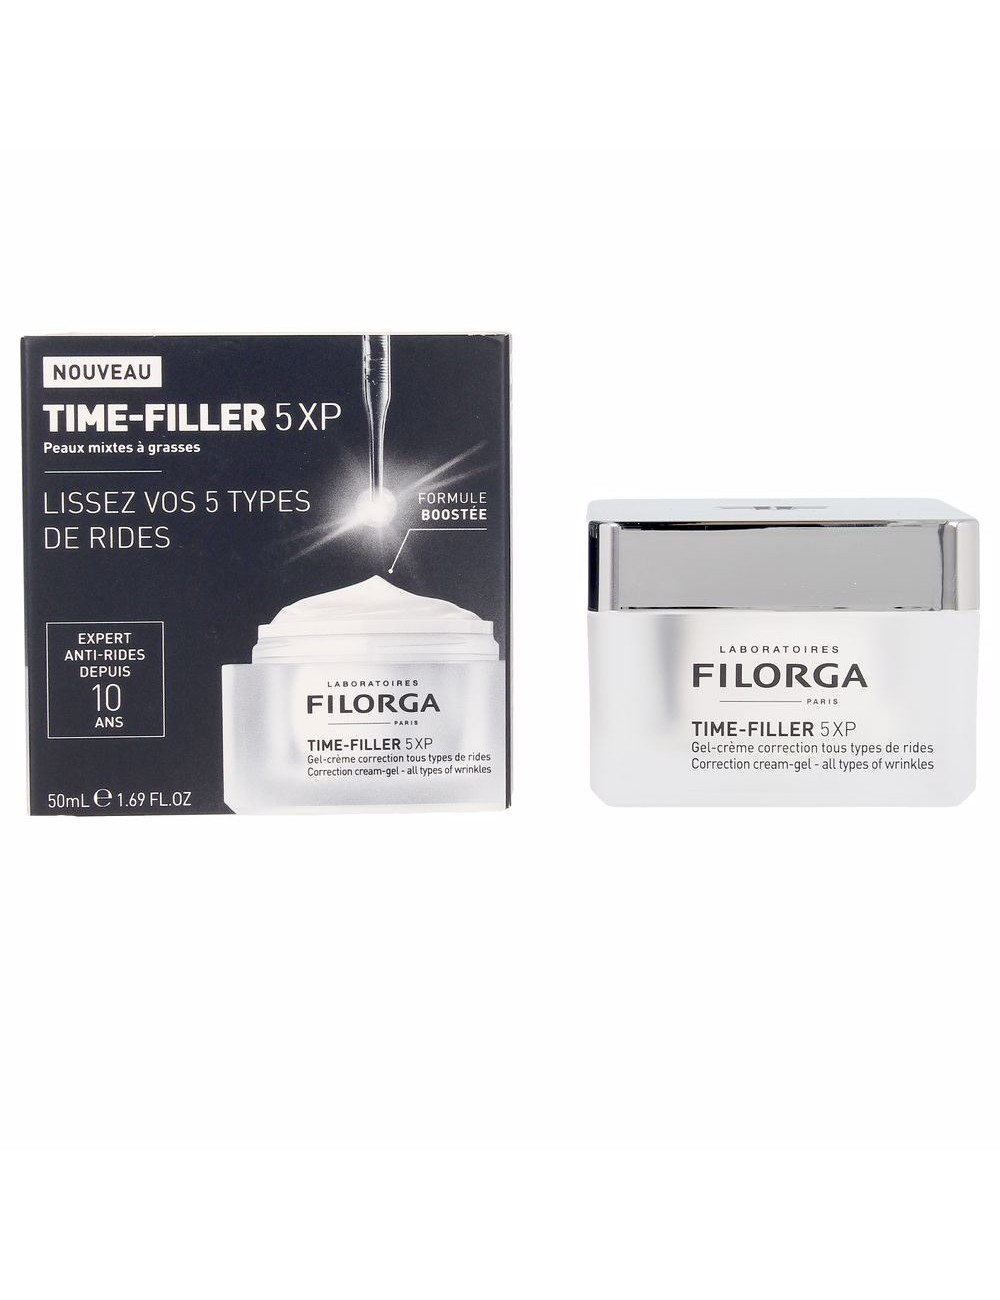 TIME-FILLER MAT perfecting care wrinkles and pores 50ml